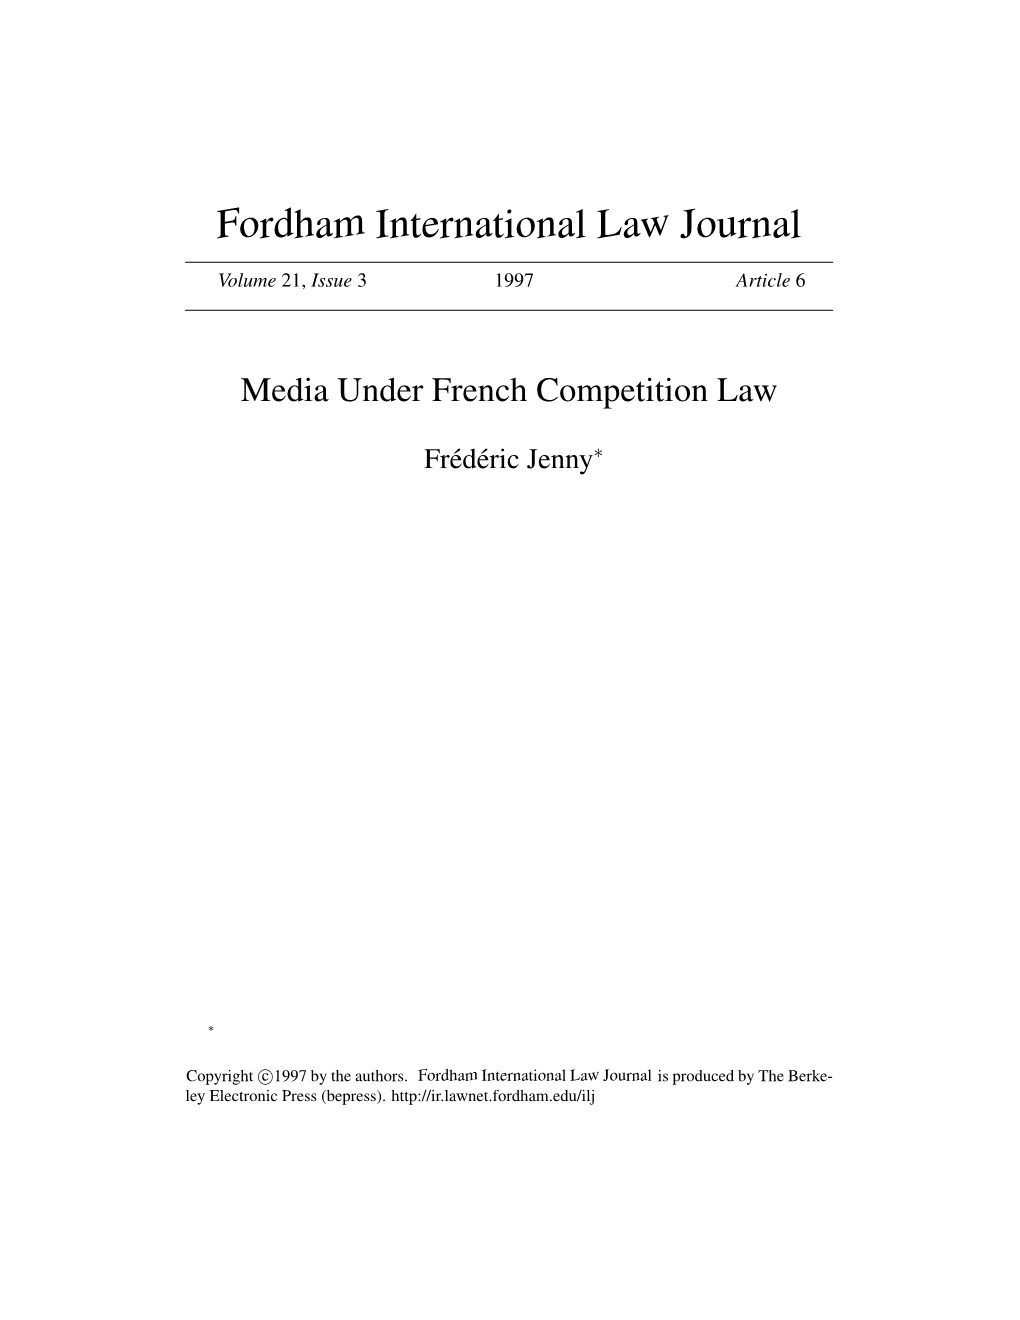 Media Under French Competition Law